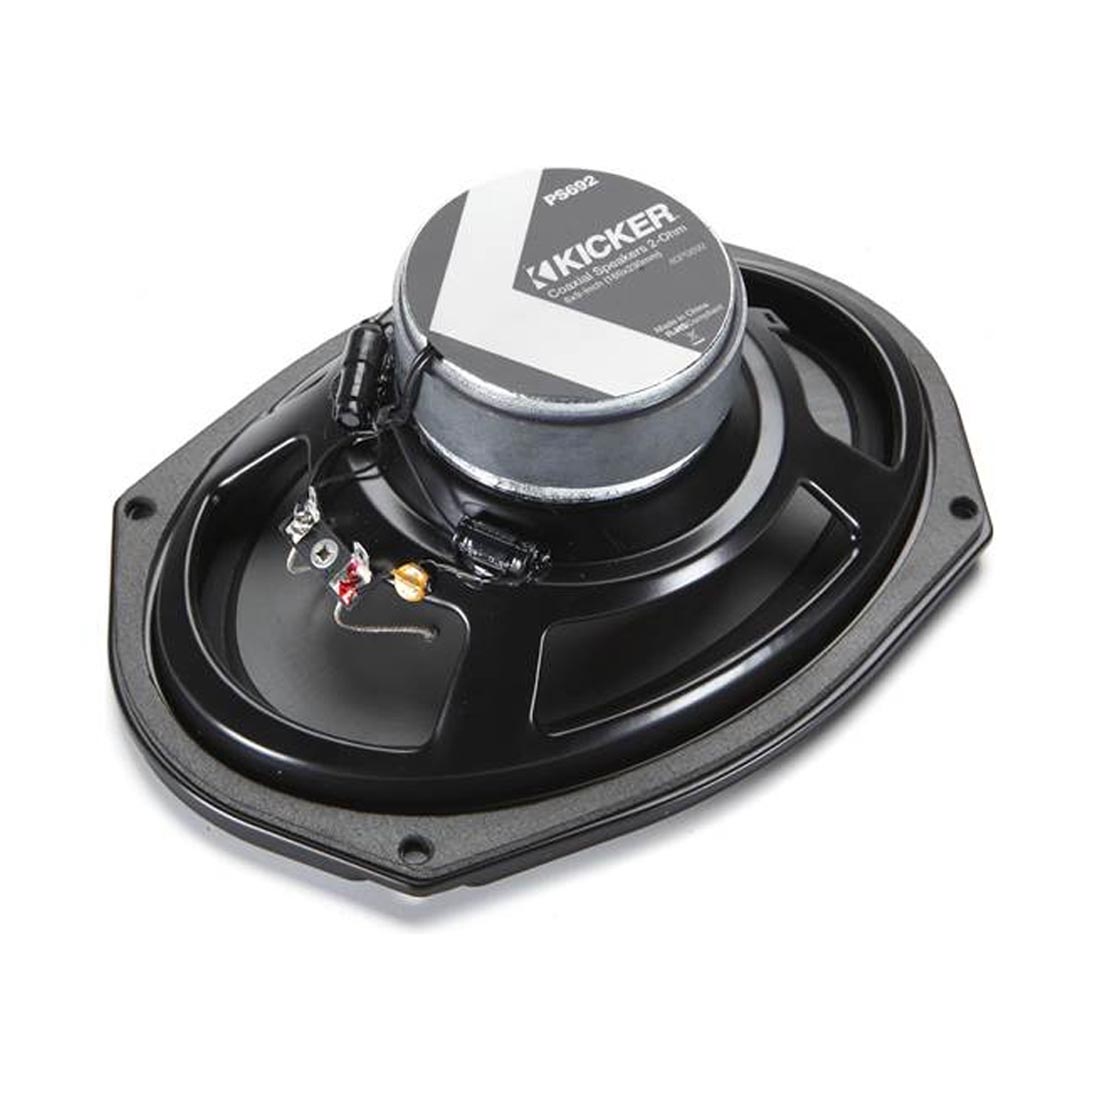 Kicker 40PS694 6"x 9" 2-Way 4-Ohm Speakers for use in Motorcycles, Boats, and ATVs